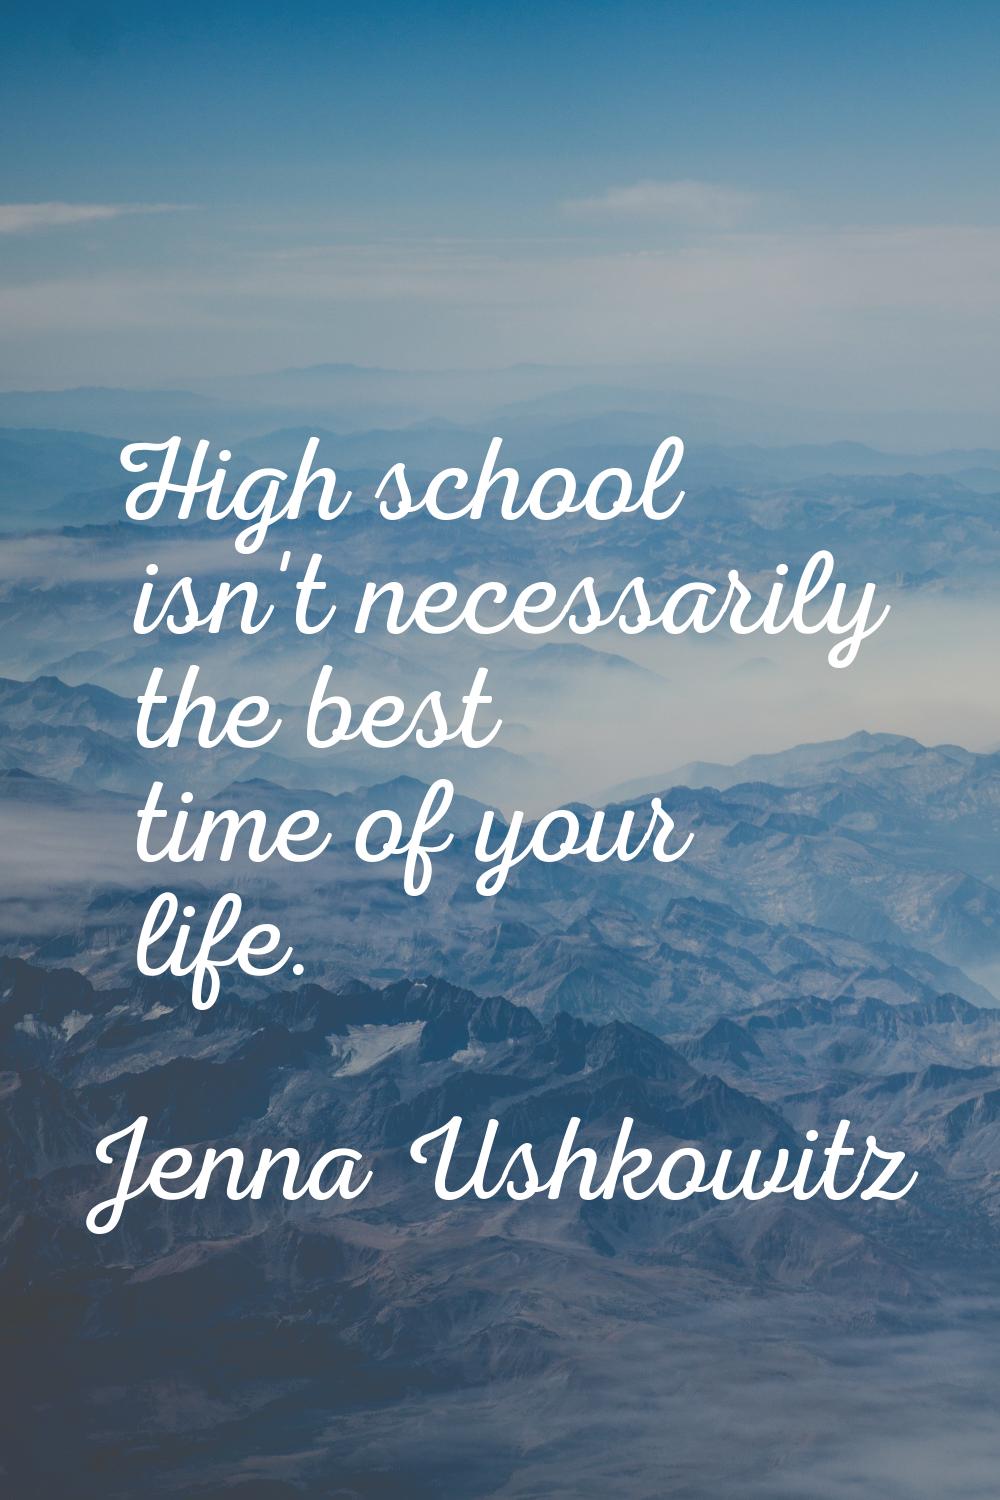 High school isn't necessarily the best time of your life.